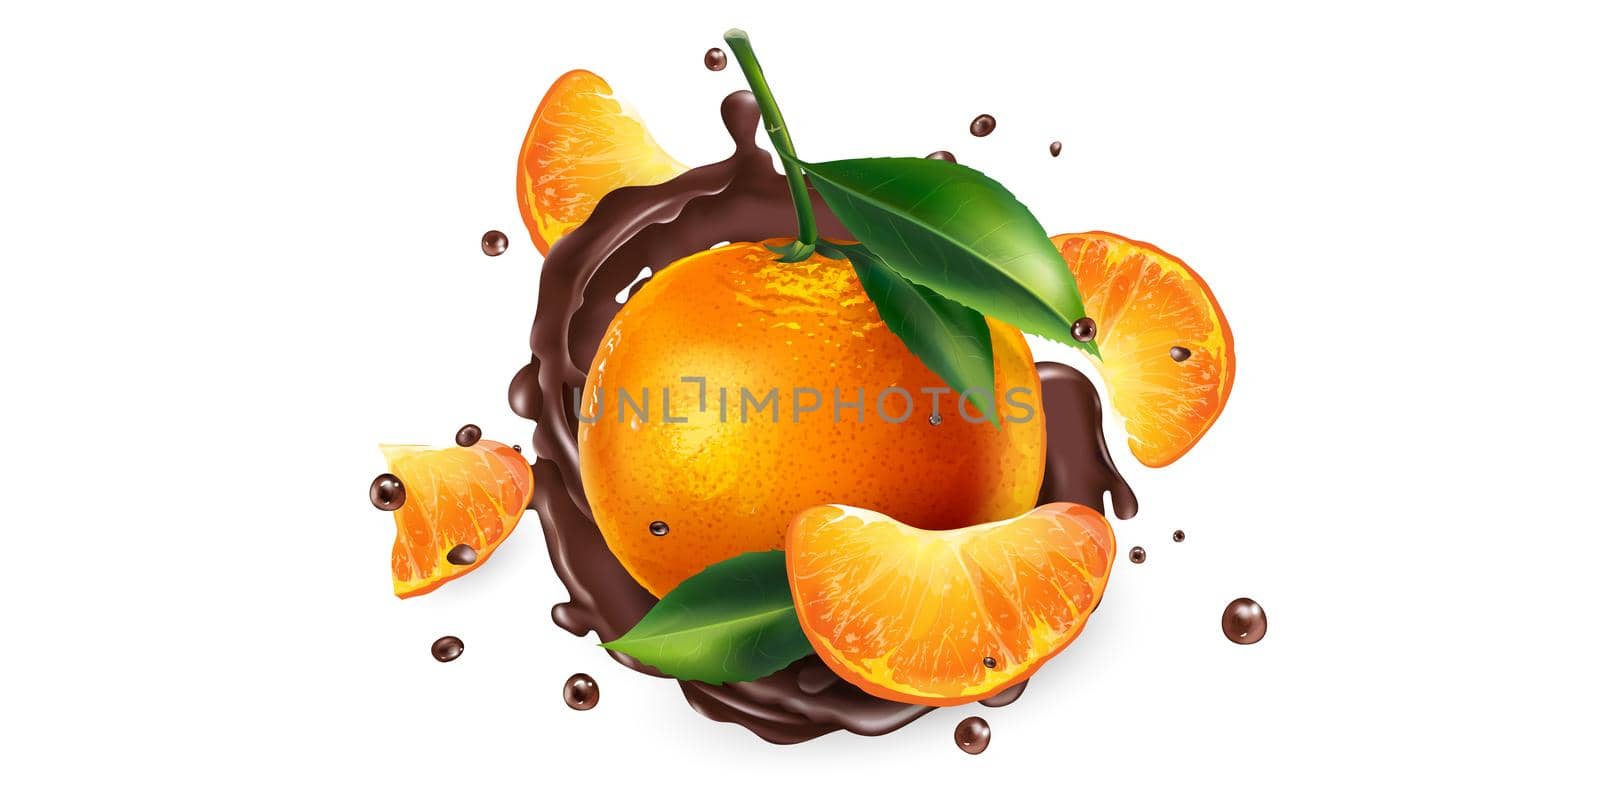 Whole and sliced mandarins in chocolate splashes on a white background. Realistic style illustration.